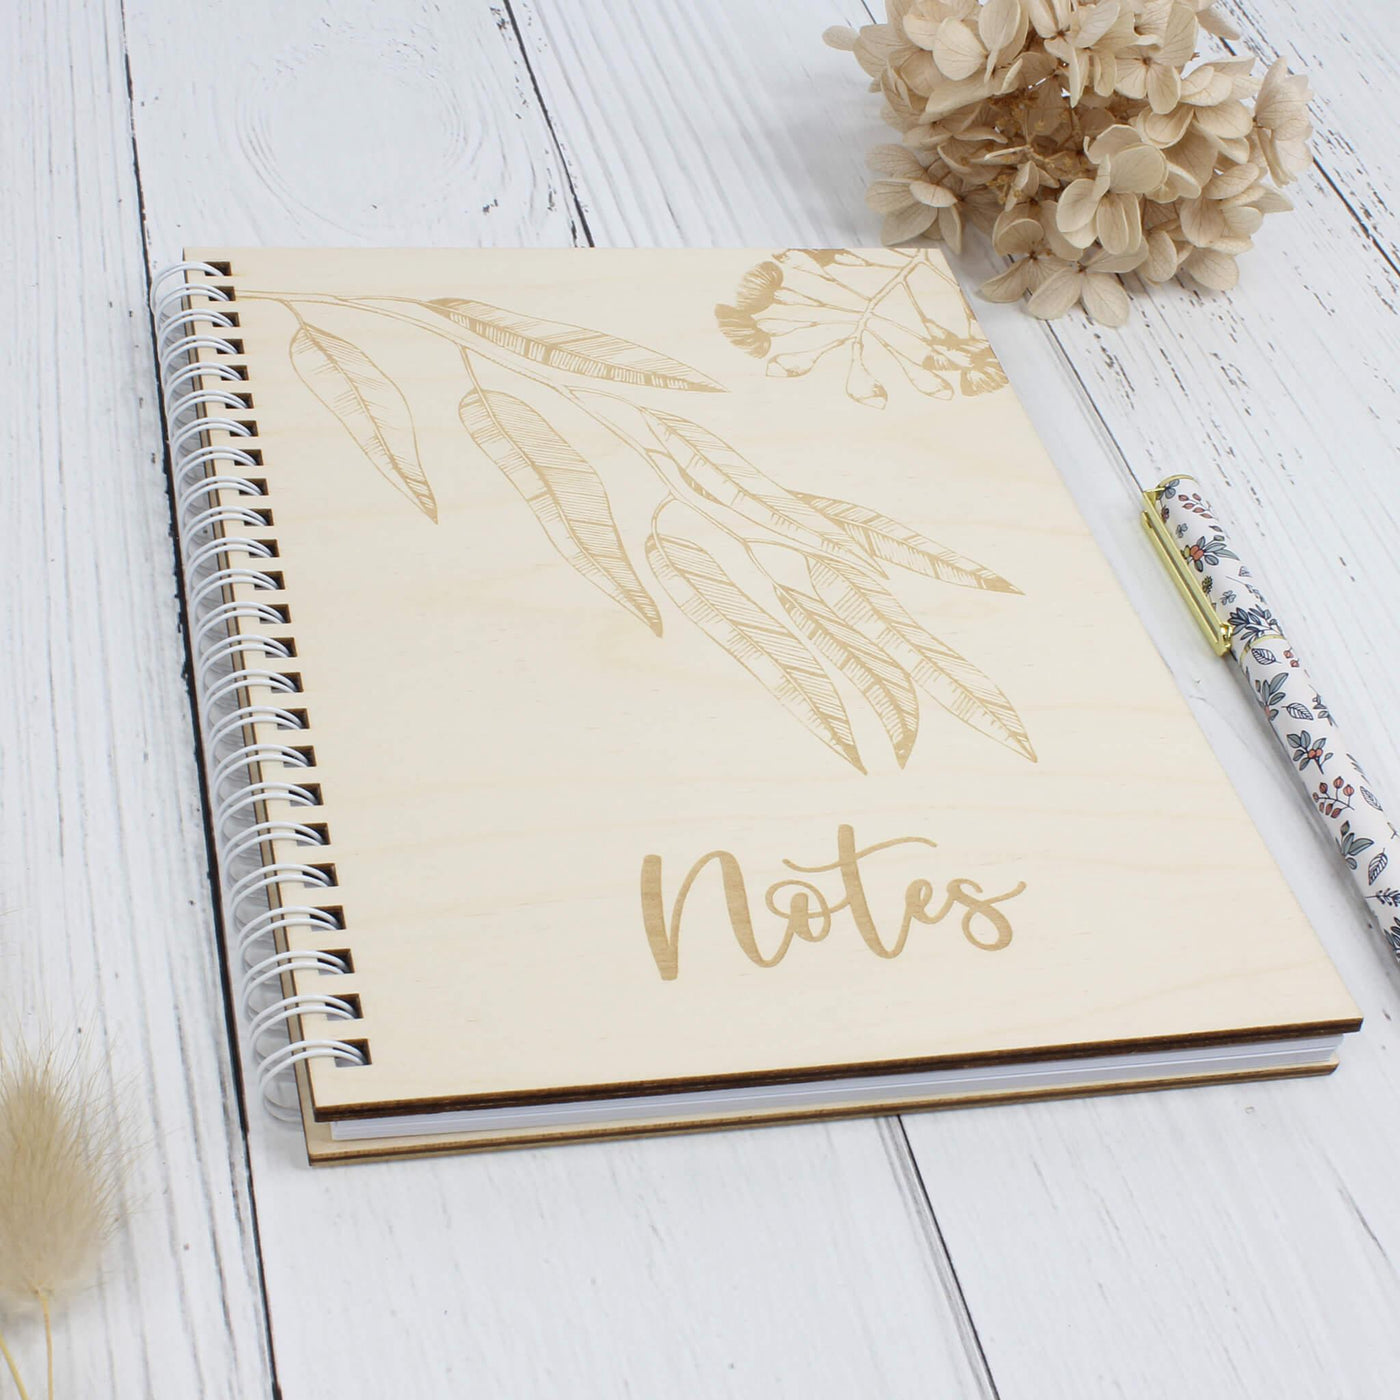 Personalised wooden notebook native flora gum